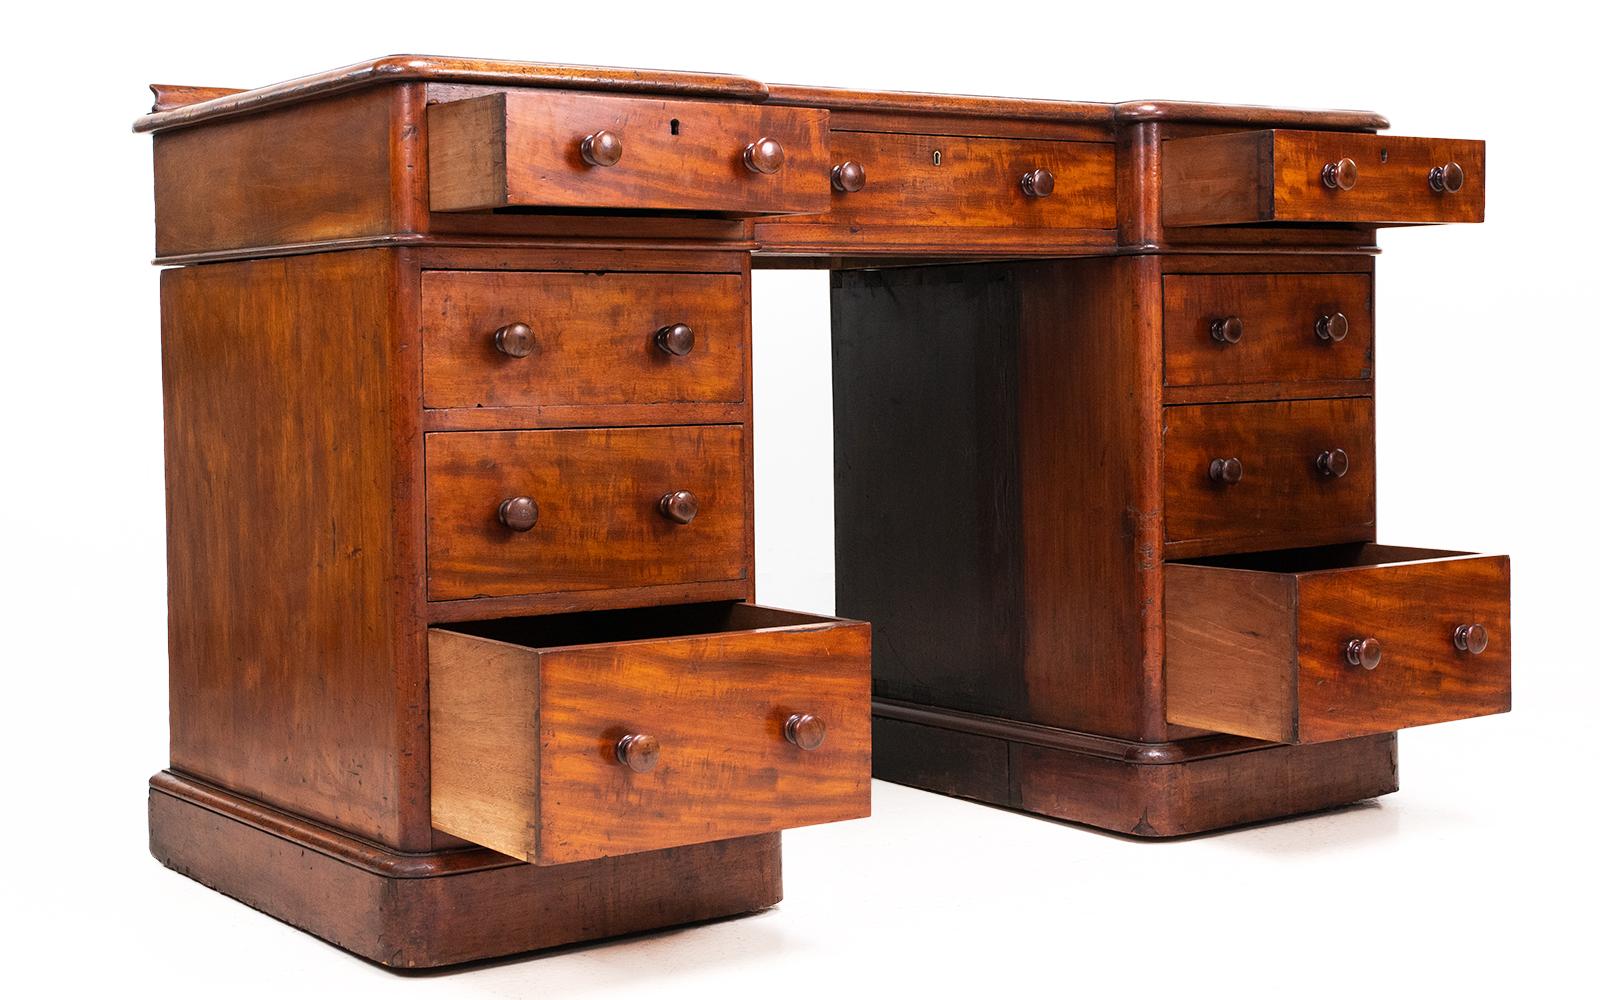 Antique Heals desk

19th Century Victorian pedestal desk by Heal & Son, London, UK.

The desk is in a beautiful rich coloured mahogany, which has aged perfectly. Each pedestal has four drawers with turned handles, and it stands on a moulded